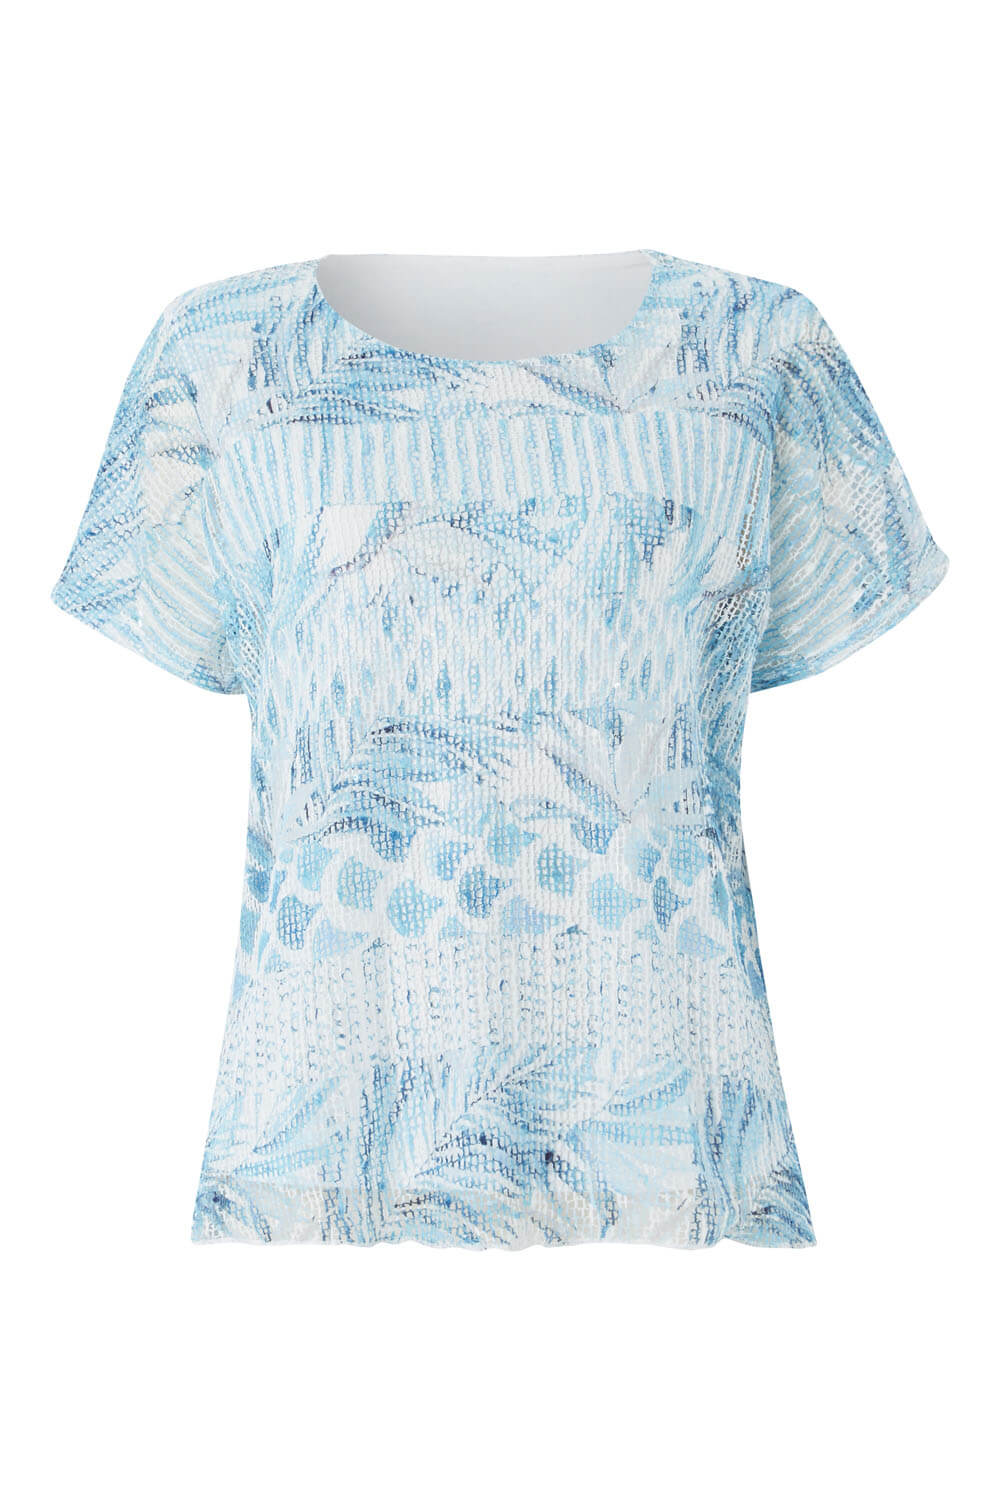 Blue Tropical Print Net Overlay Top, Image 4 of 8